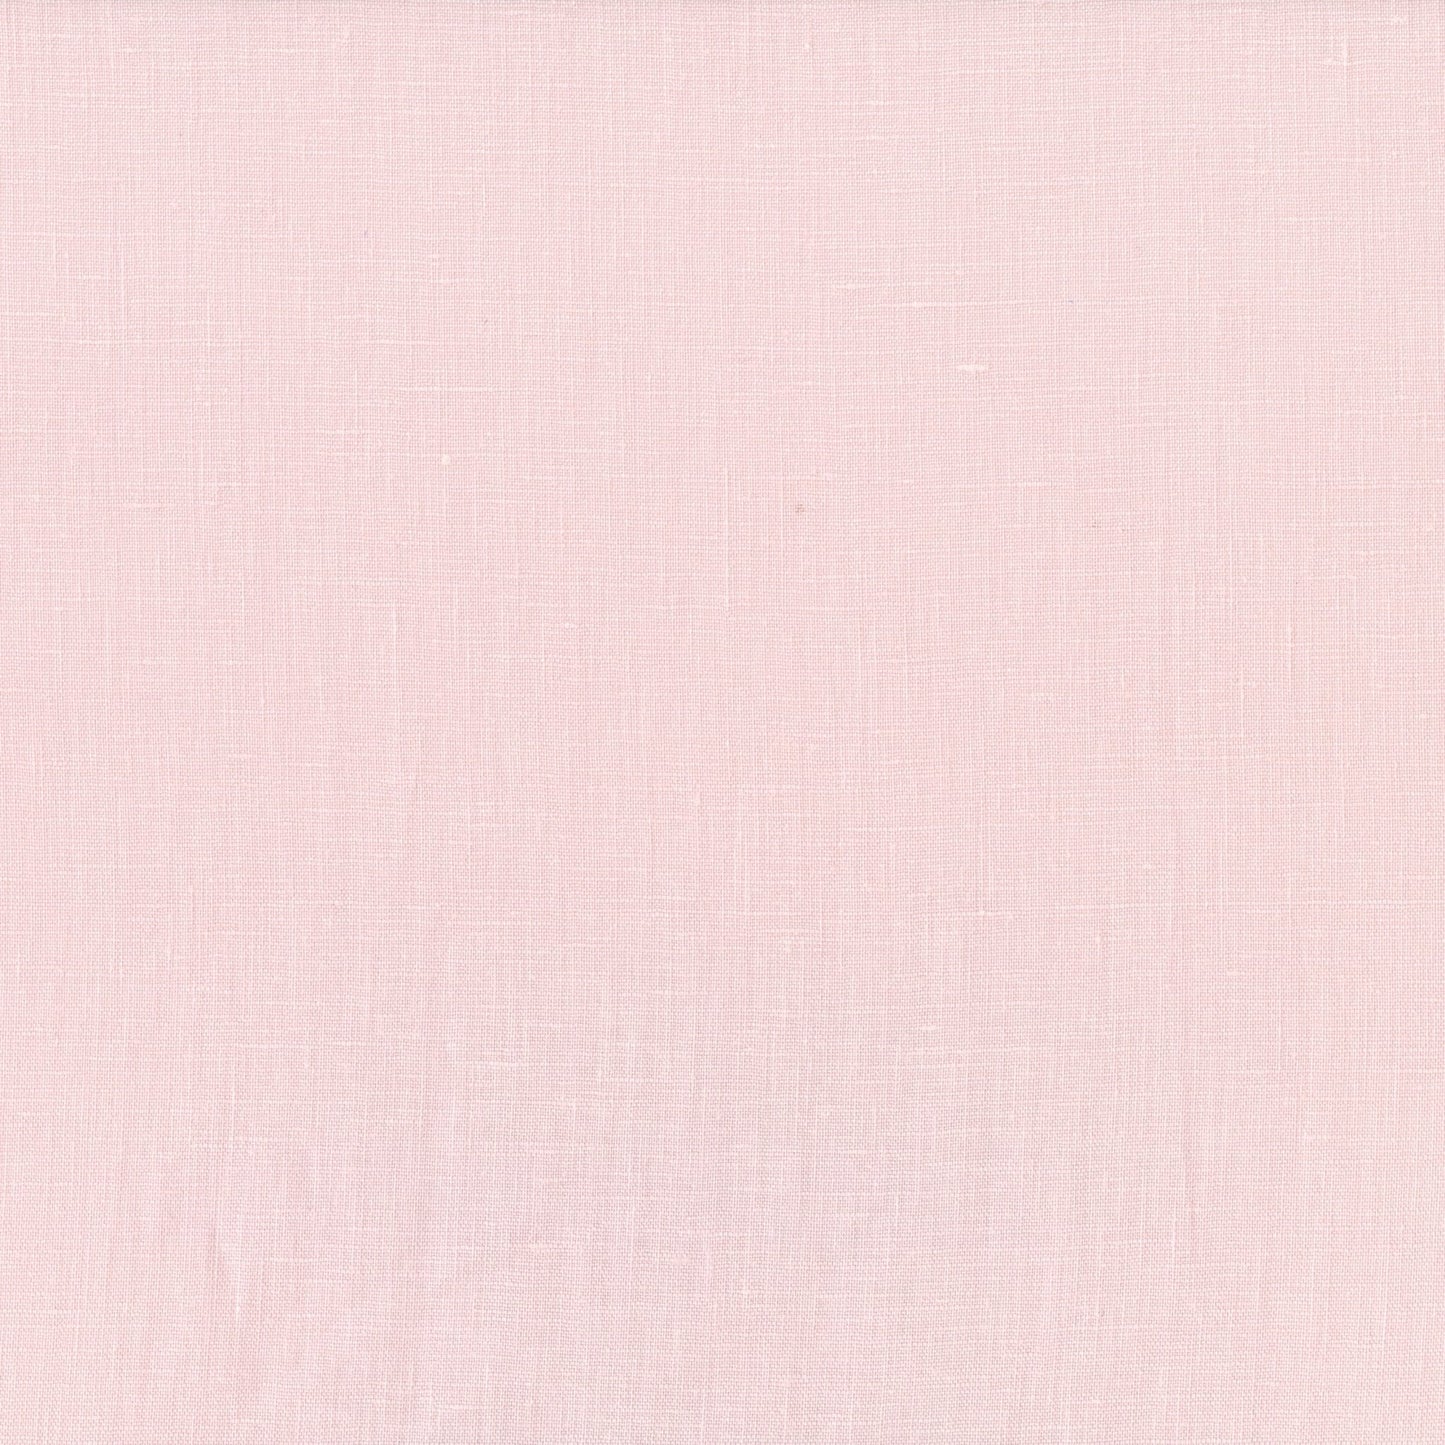 Dusty Pink Linen Swatch - New Arrivals Inc